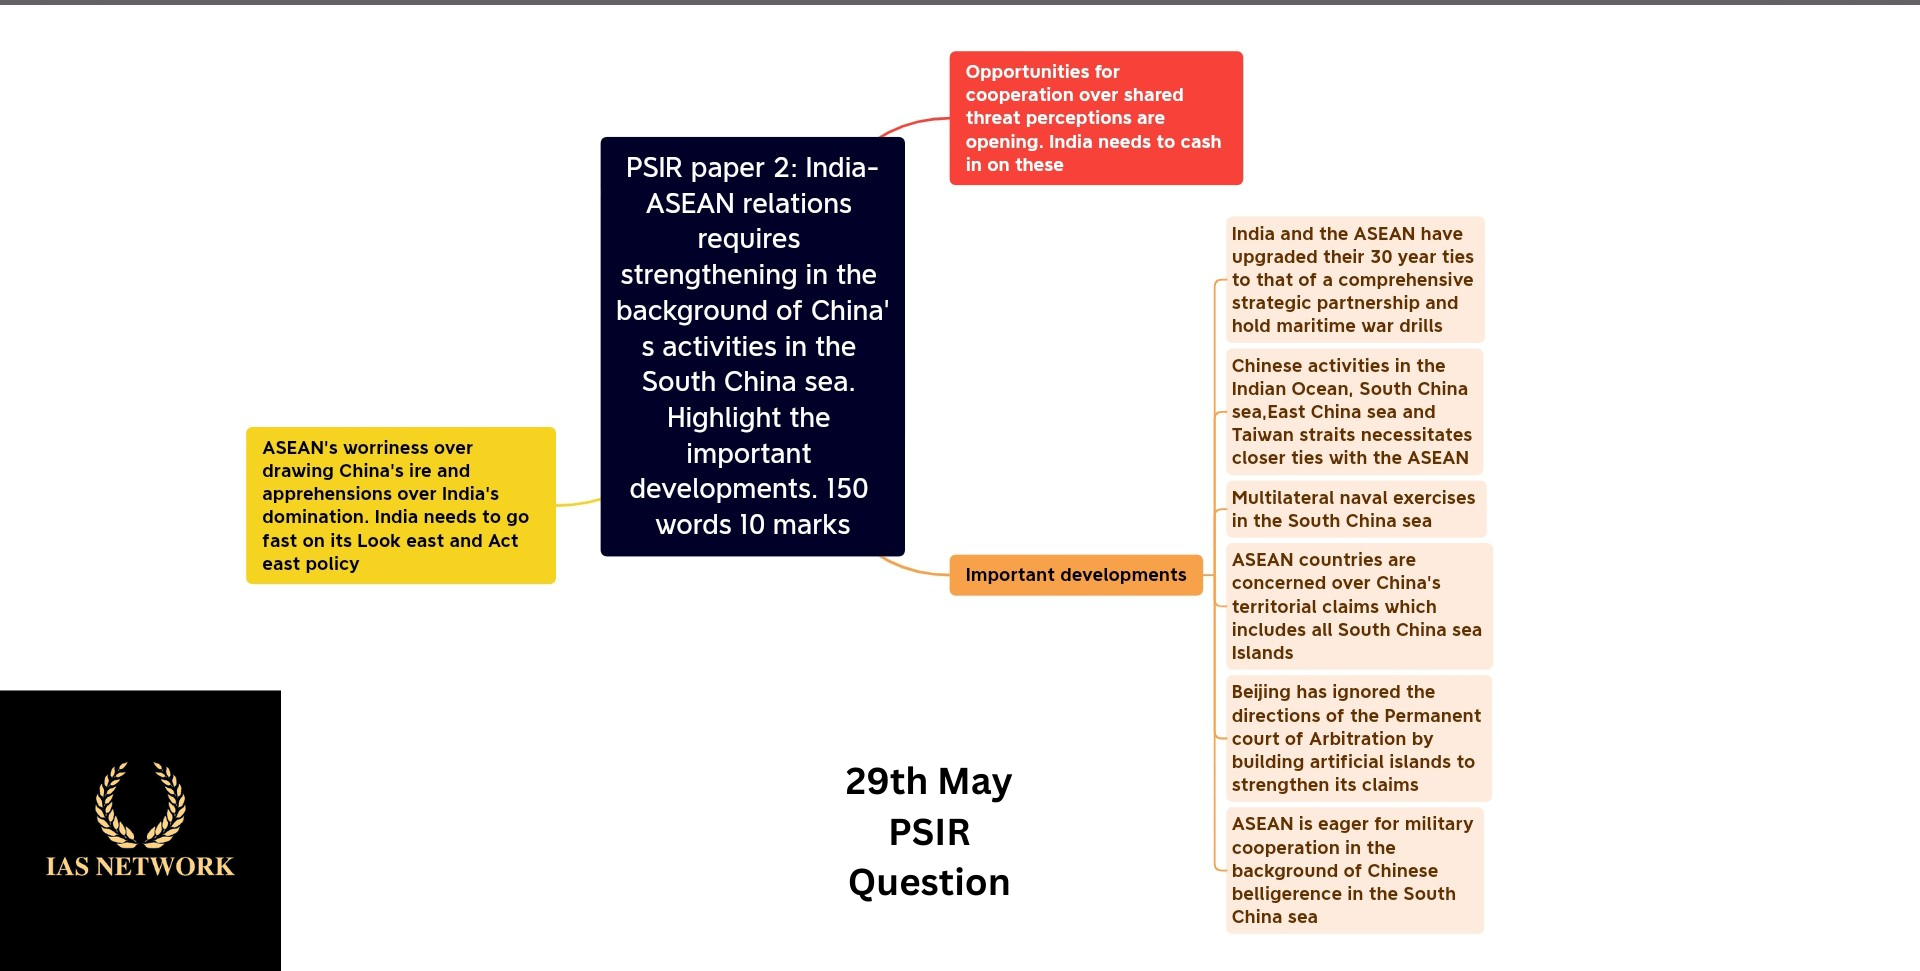 IAS NETWORK 29th MAY PSIR QUESTION